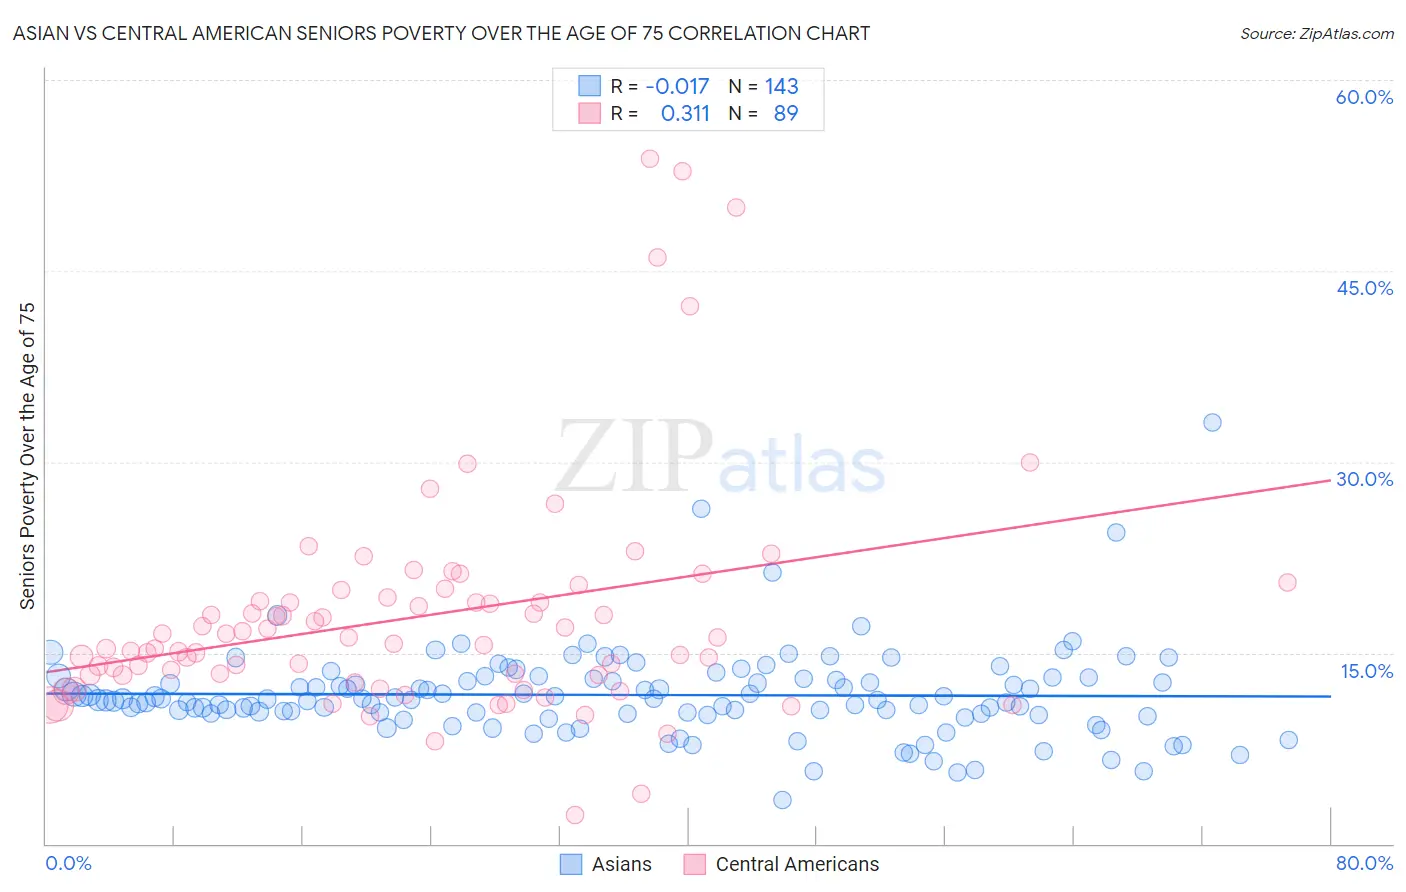 Asian vs Central American Seniors Poverty Over the Age of 75